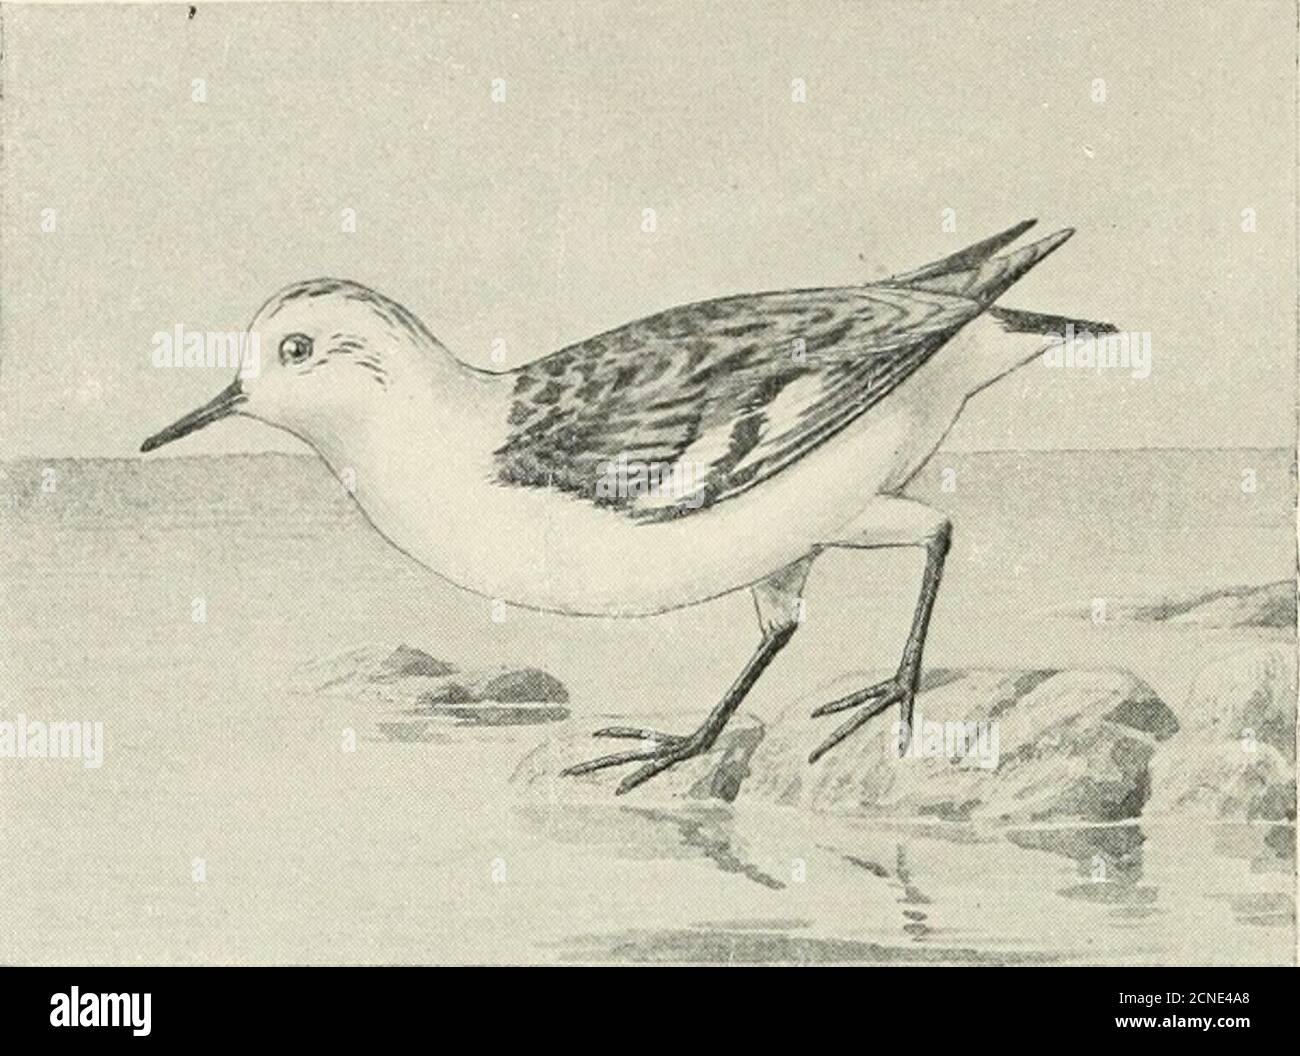 . The birds of Illinois and Wisconsin . ome professional ornithologist todecide such a fine point. Length, 6; wing, 3.85; tarsus, .82; bill, .90 to 1.15. Common in Illinois and Wisconsin during the migrations, butmuch less numerous than the preceding species. Genus CALIDRIS Illiger. 121. Calidris leucophaea (Pallas).Sanderling. Calidris arenaria Linn., A. O. U. Check List, 1895, p. 91. Distr.: Northern hemisphere; in America breeding in the Arcticand subarctic regions; south in winter as far as southern SouthAmerica (Patagonia), also India and South Africa. Adult in summer: Head, throat, and u Stock Photo